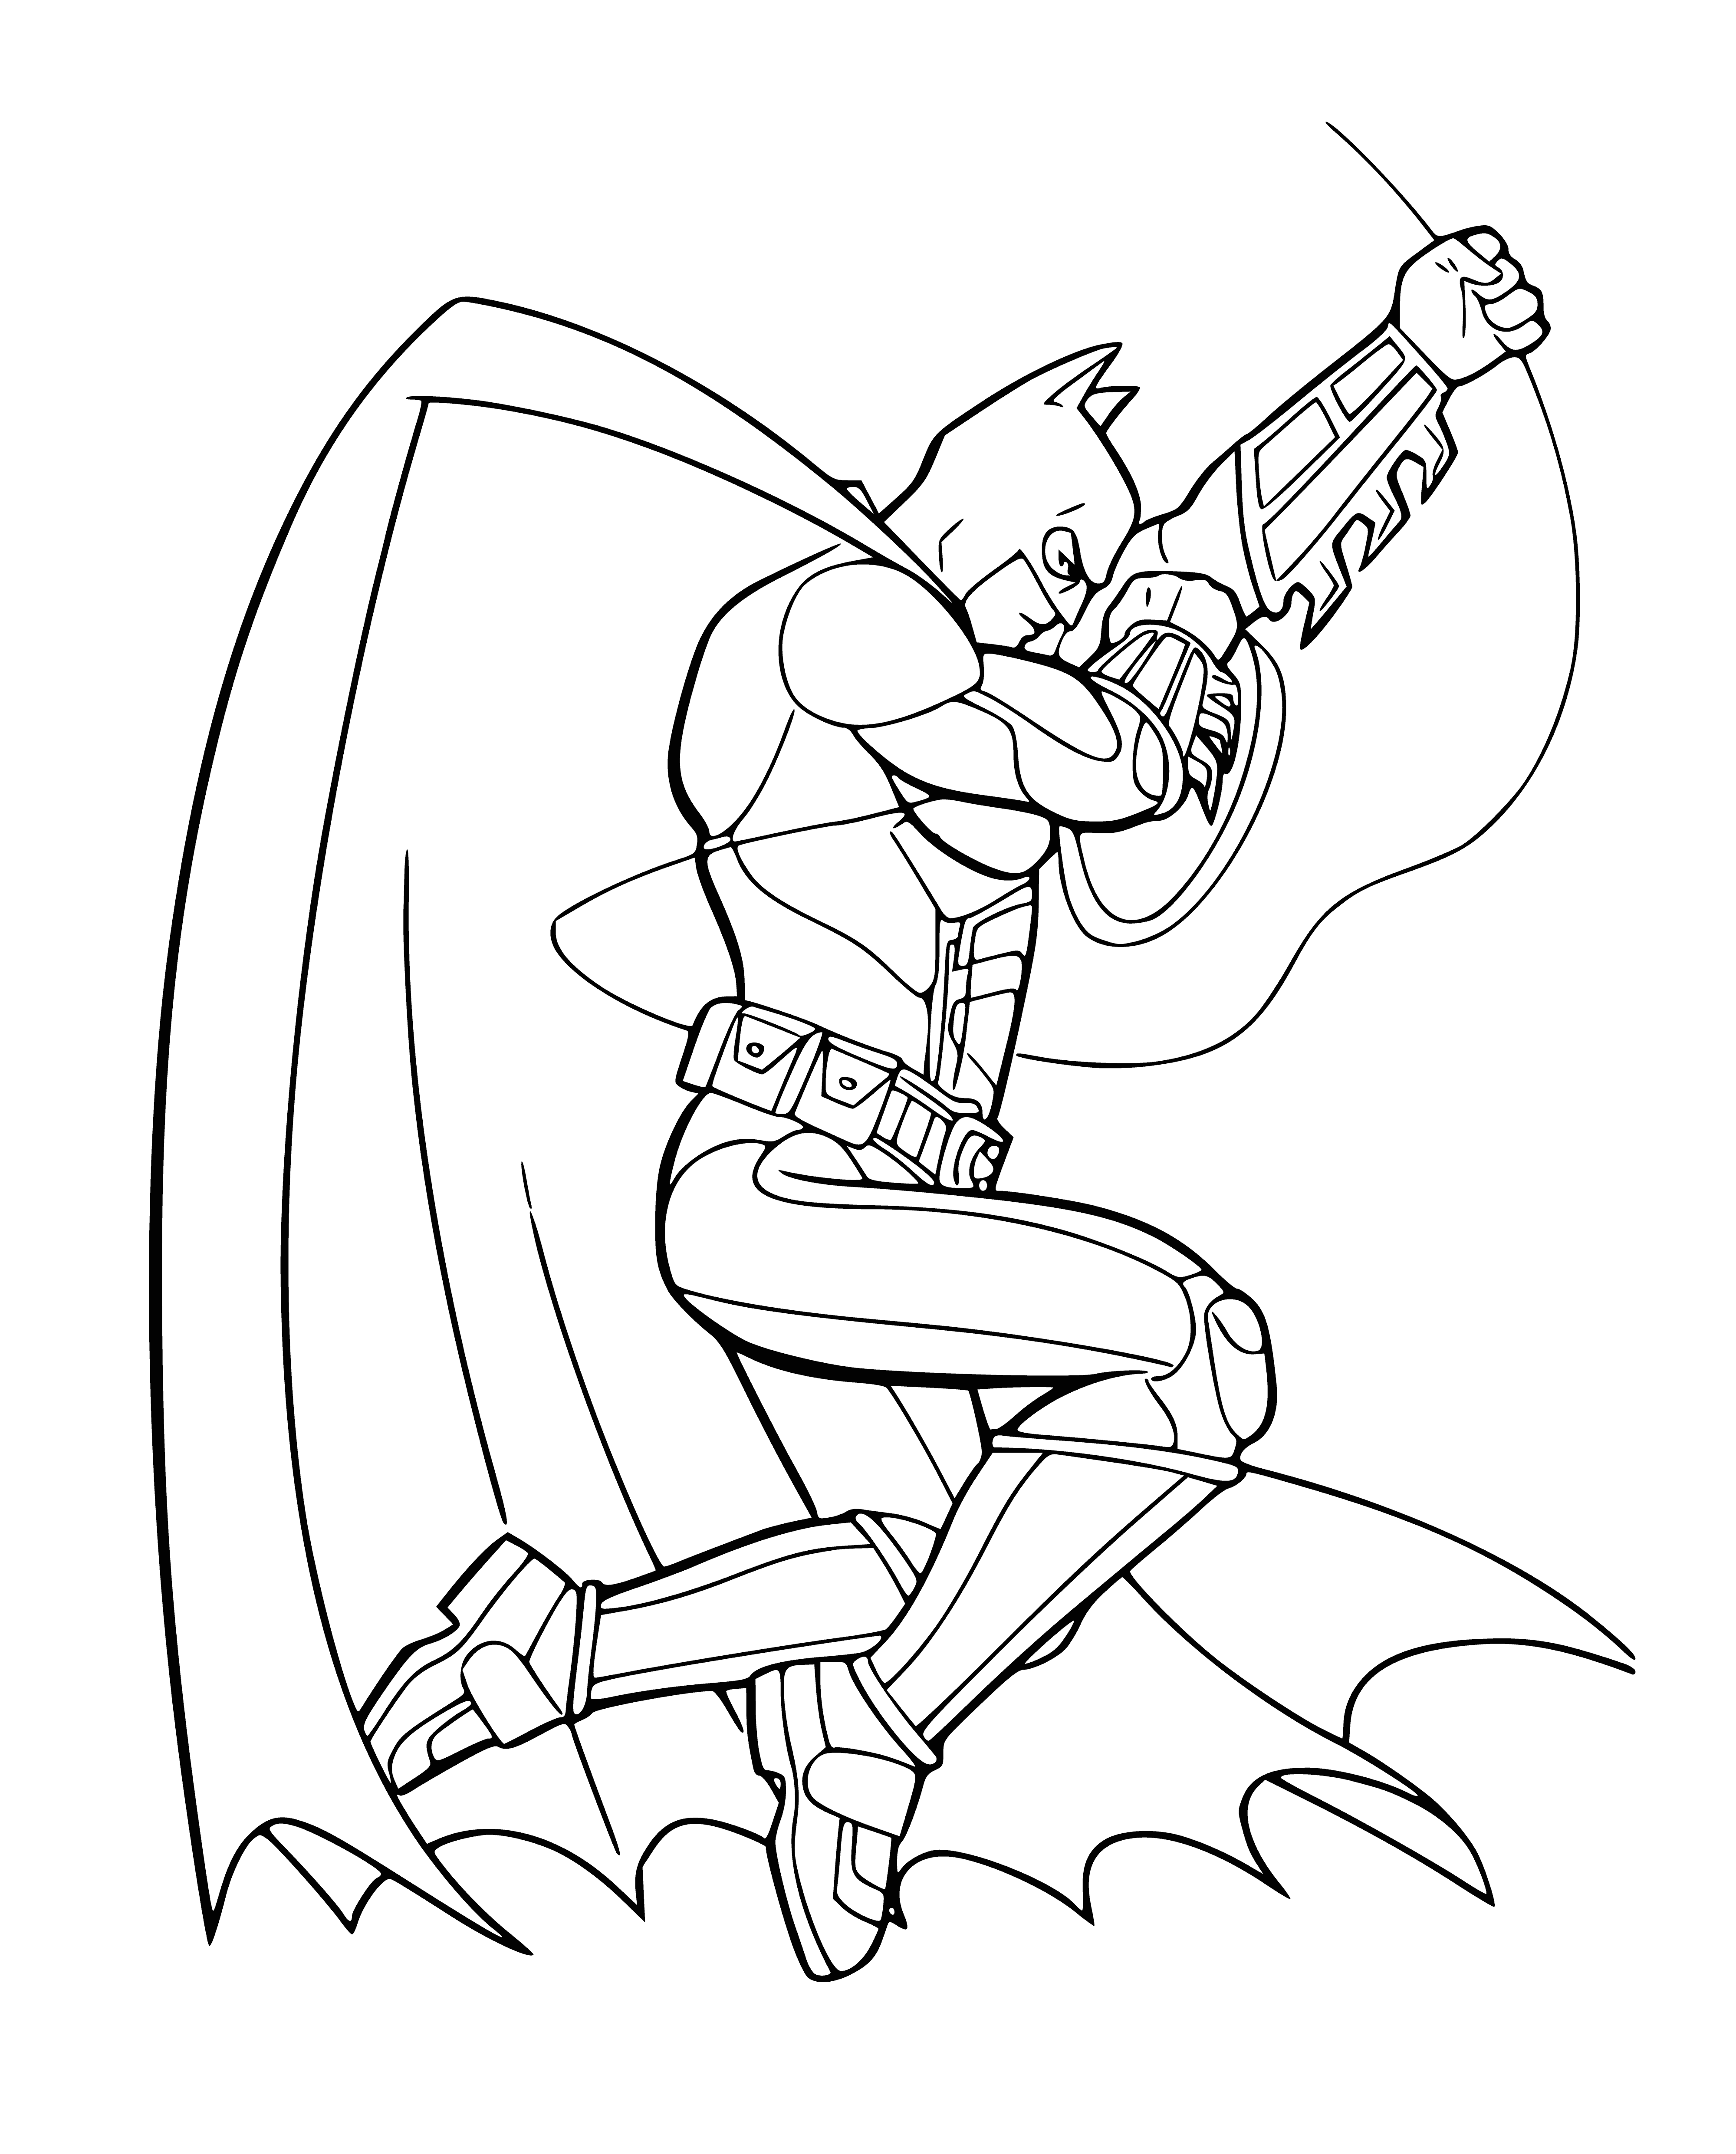 coloring page: Batman: black & grey suit, yellow bat emblem, white eyes, black cape, standing on rooftop at night.